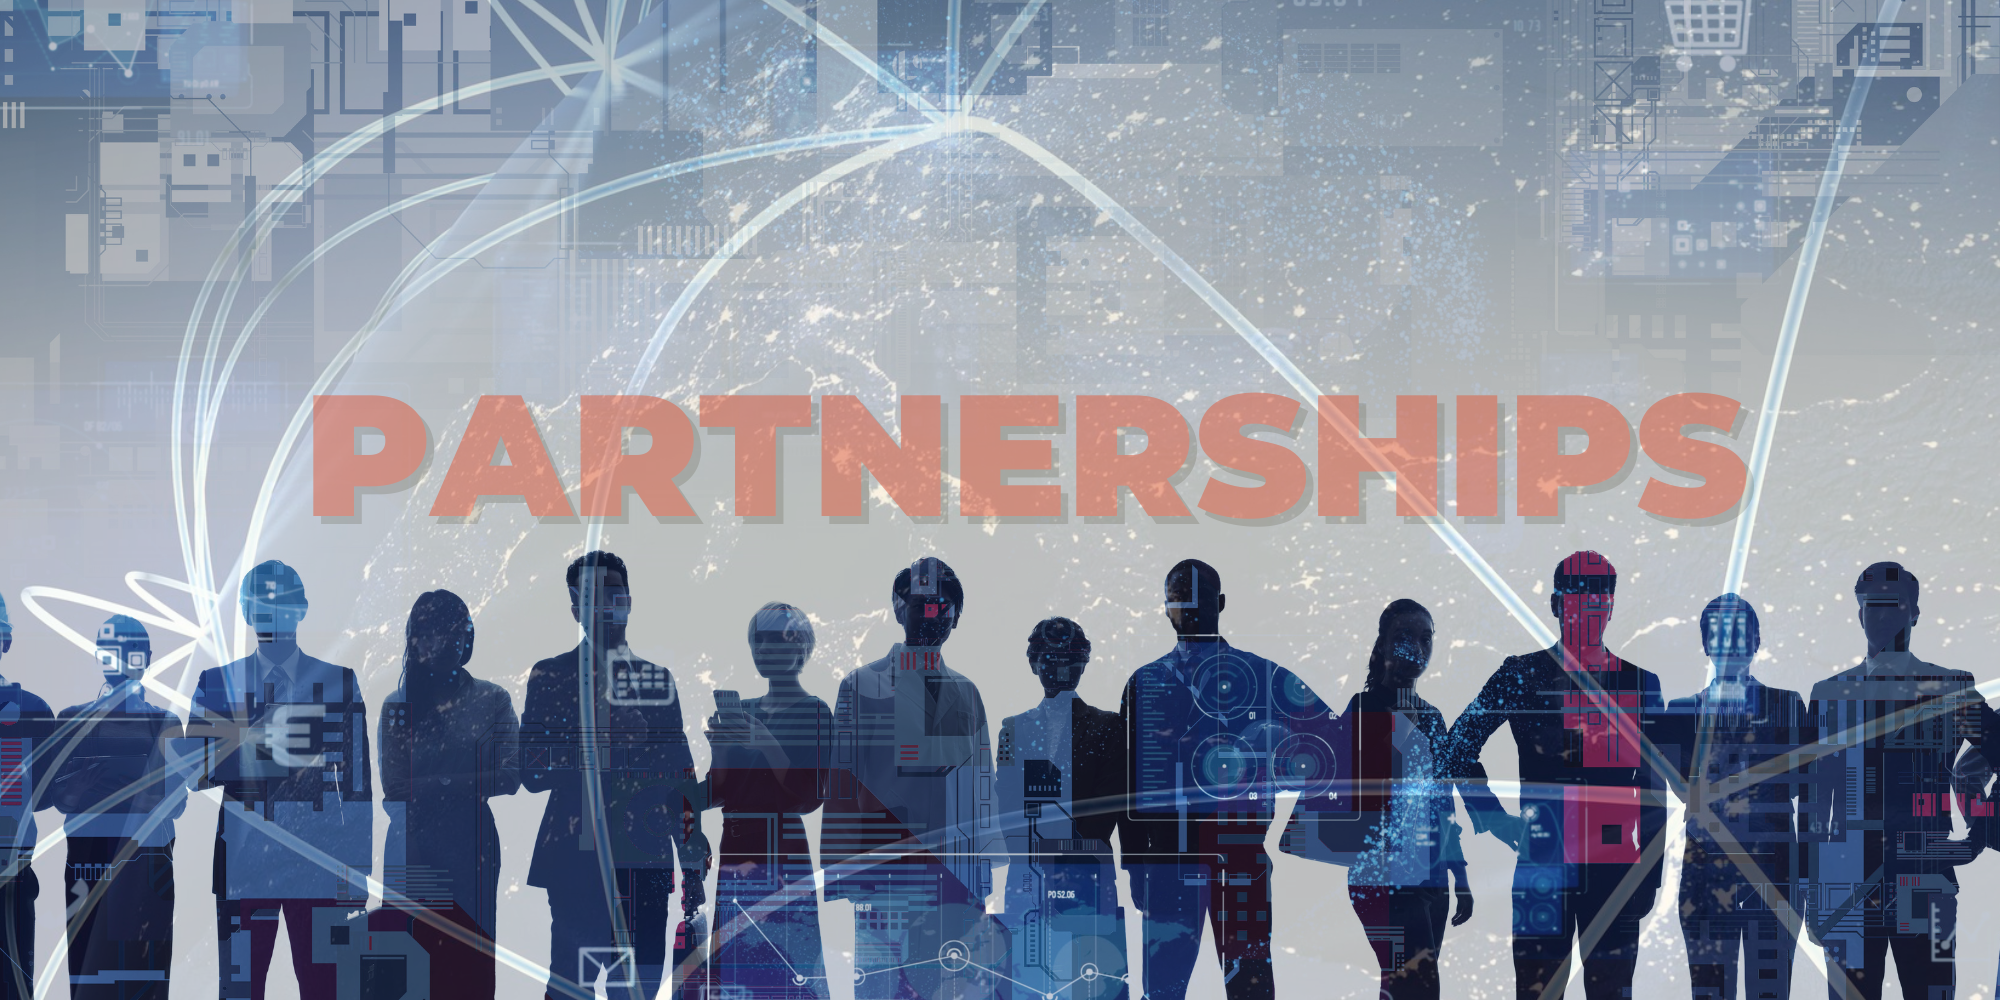 What is a Partnership Specialist?